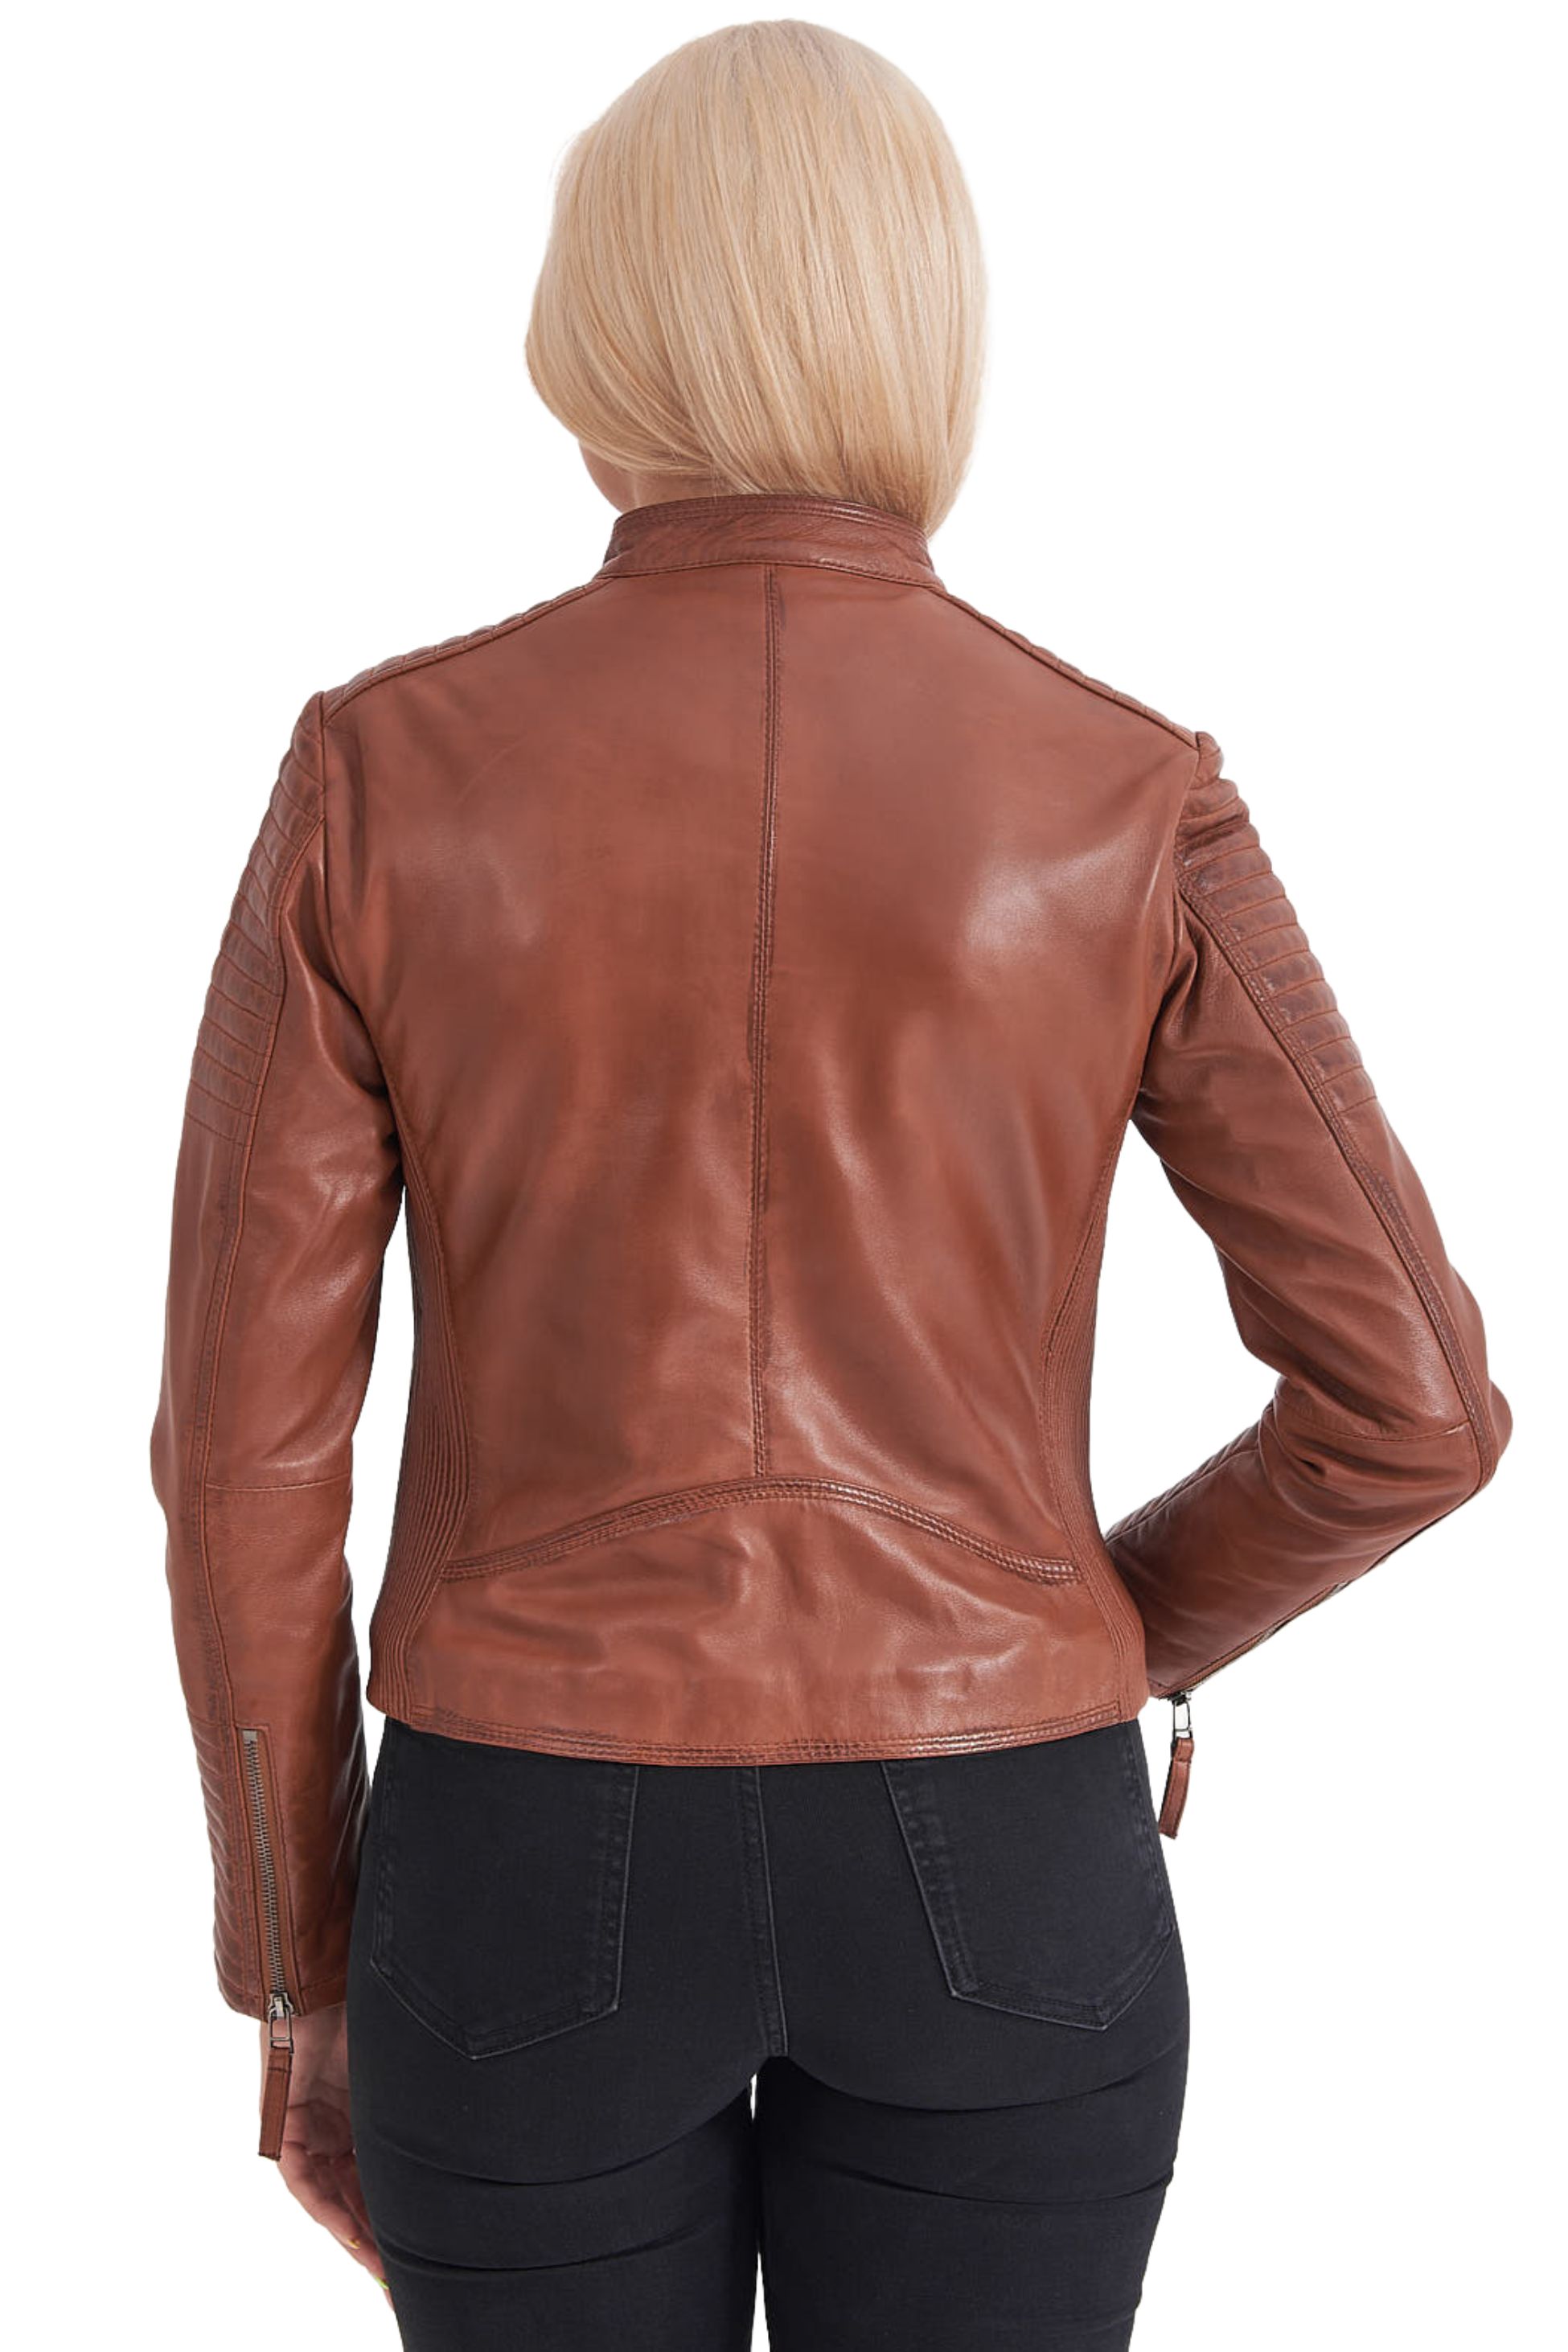 PASIPHAE SHEEP COGNAC - AUTHENTIC WOMENS LEATHER JACKET